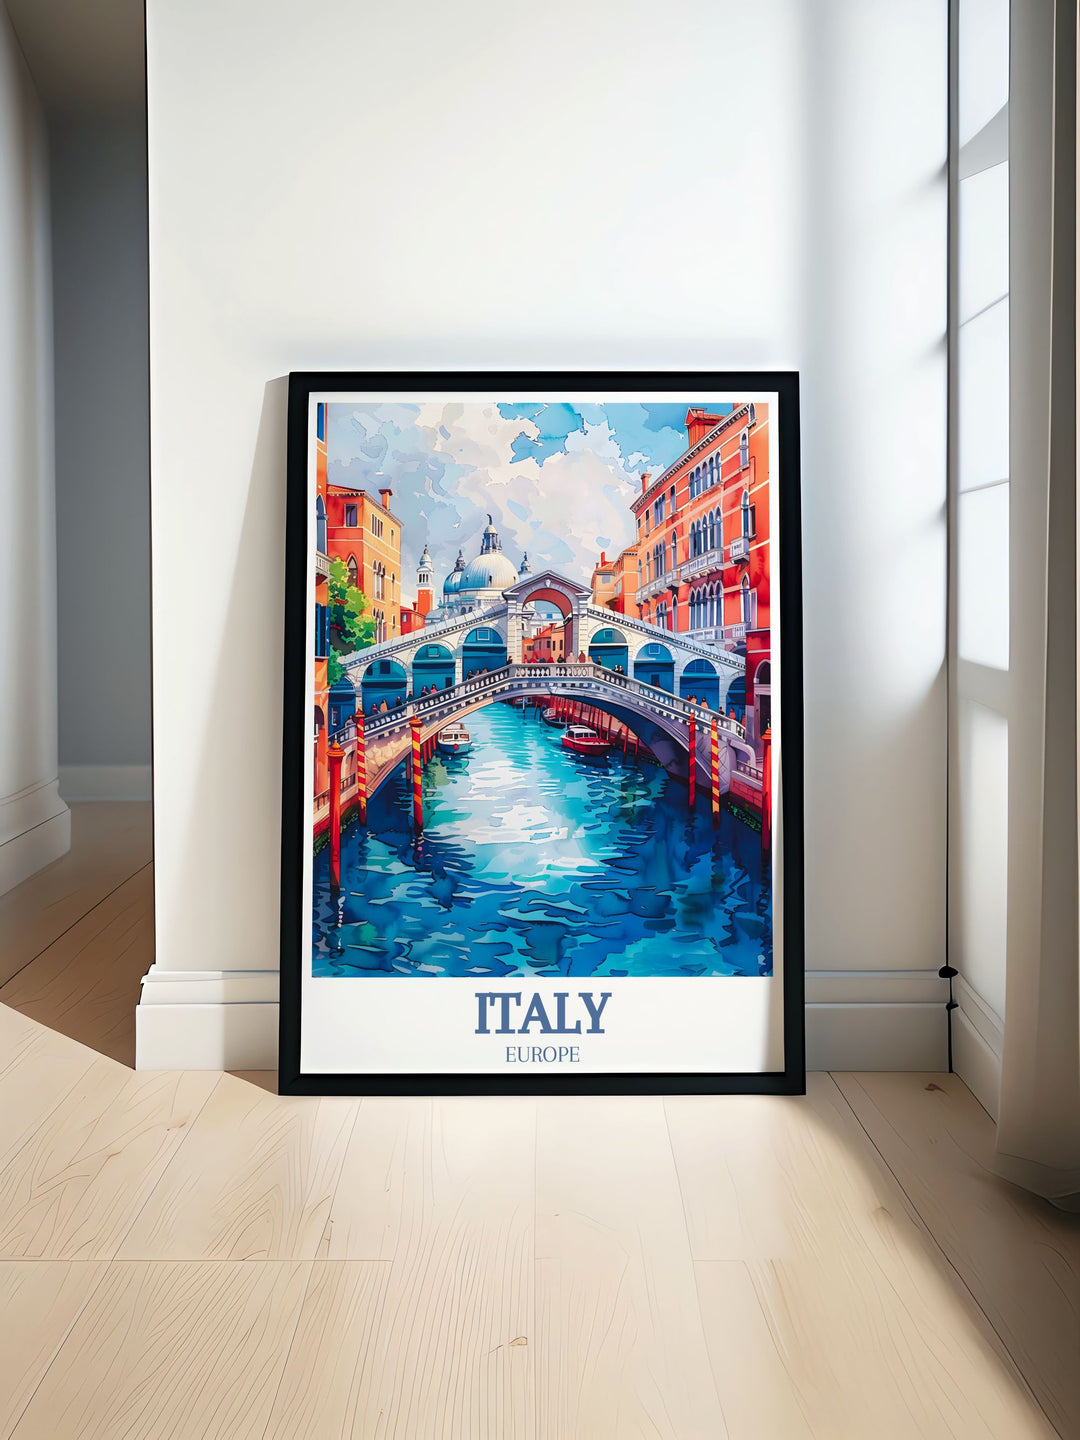 This art print of the Grand Canal, Rialto Bridge, and St. Marks Basilica in Venice showcases the citys unique blend of history, culture, and natural beauty, making it a standout piece in any decor.